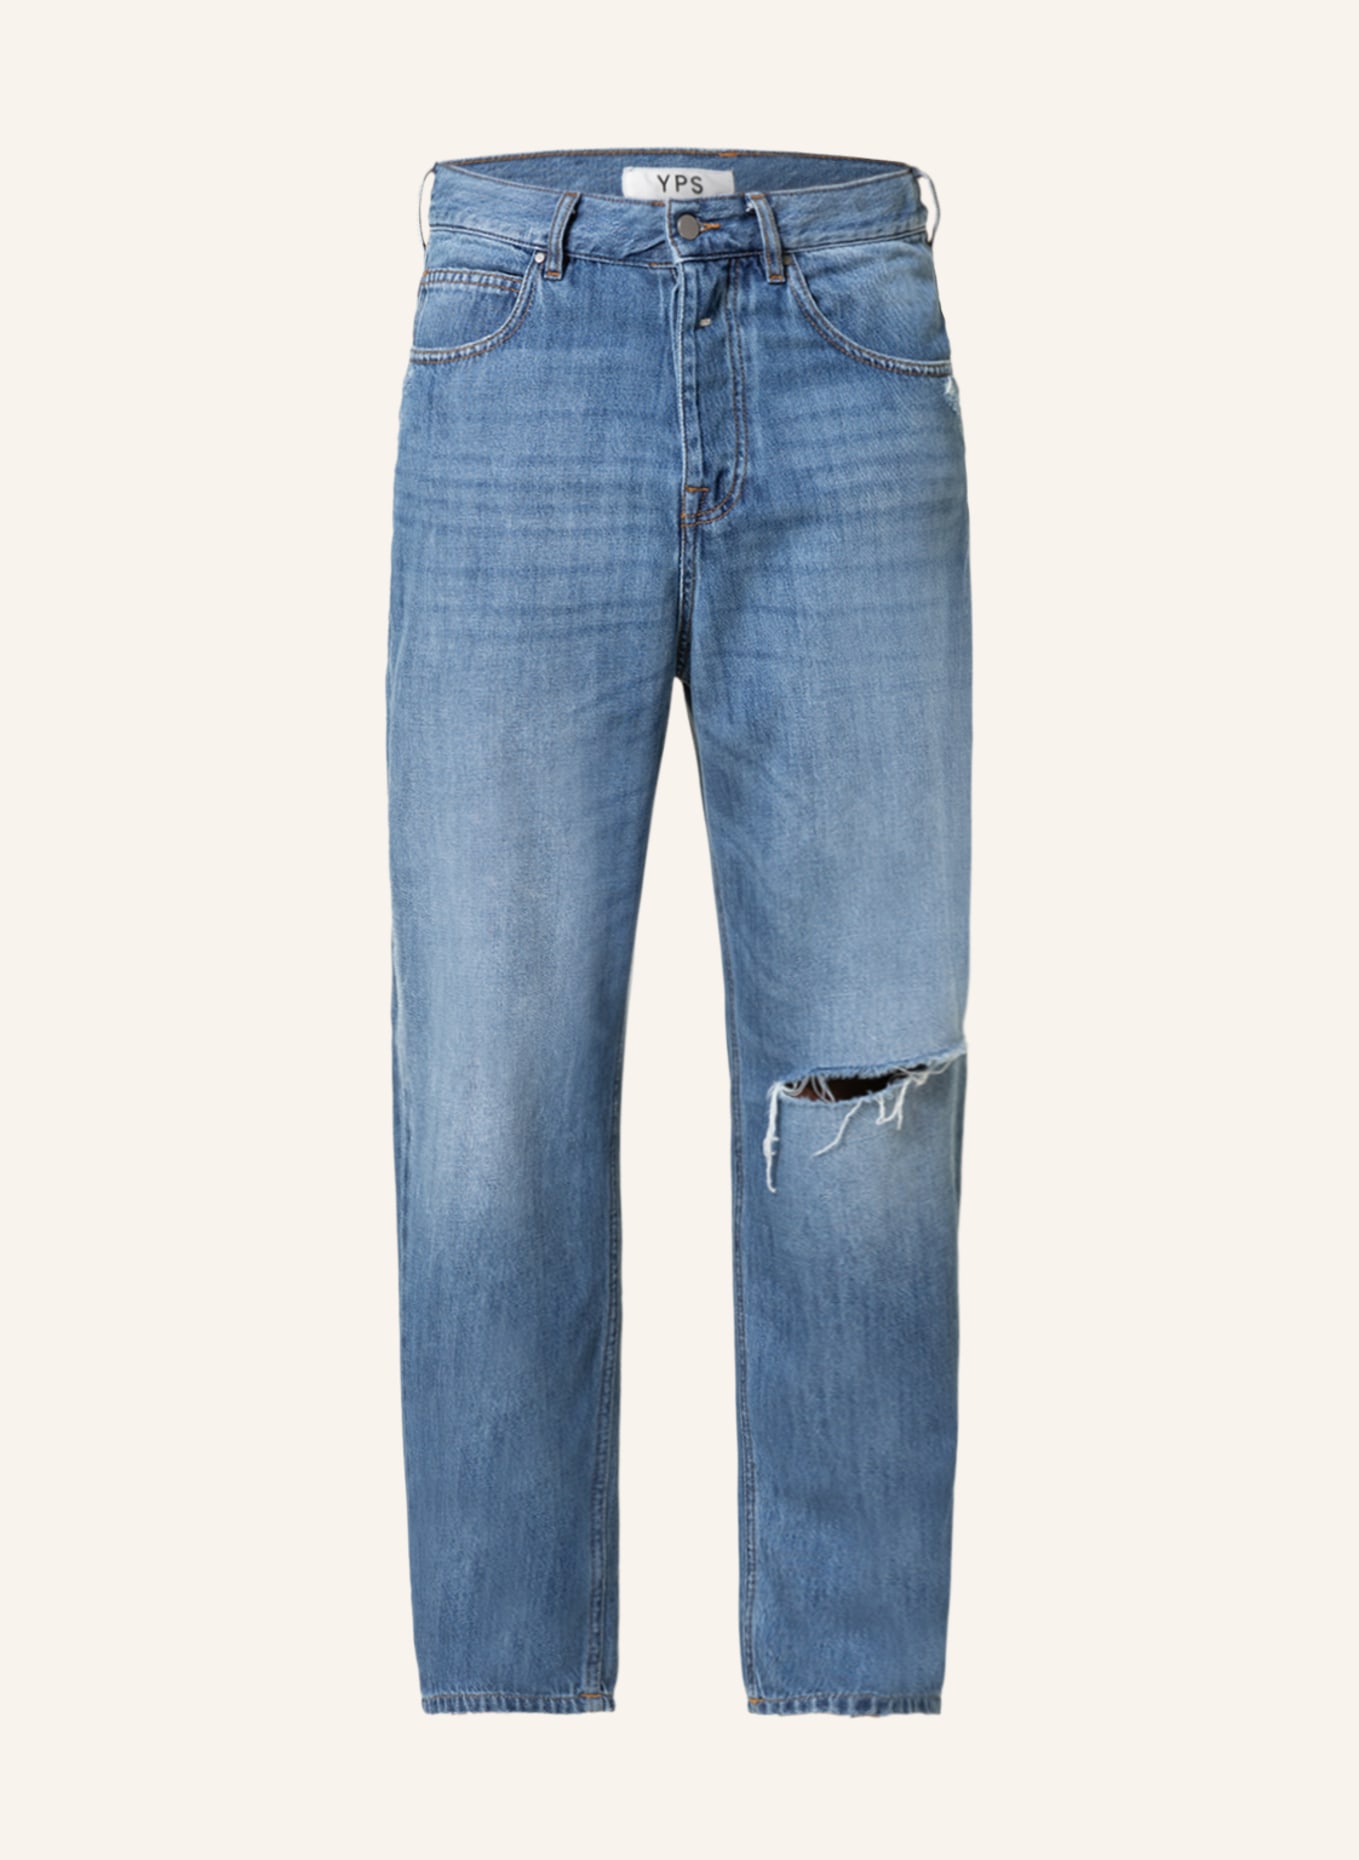 YOUNG POETS Destroyed Jeans TONI Tapered Fit, Farbe: 522 Mid Blue (Bild 1)